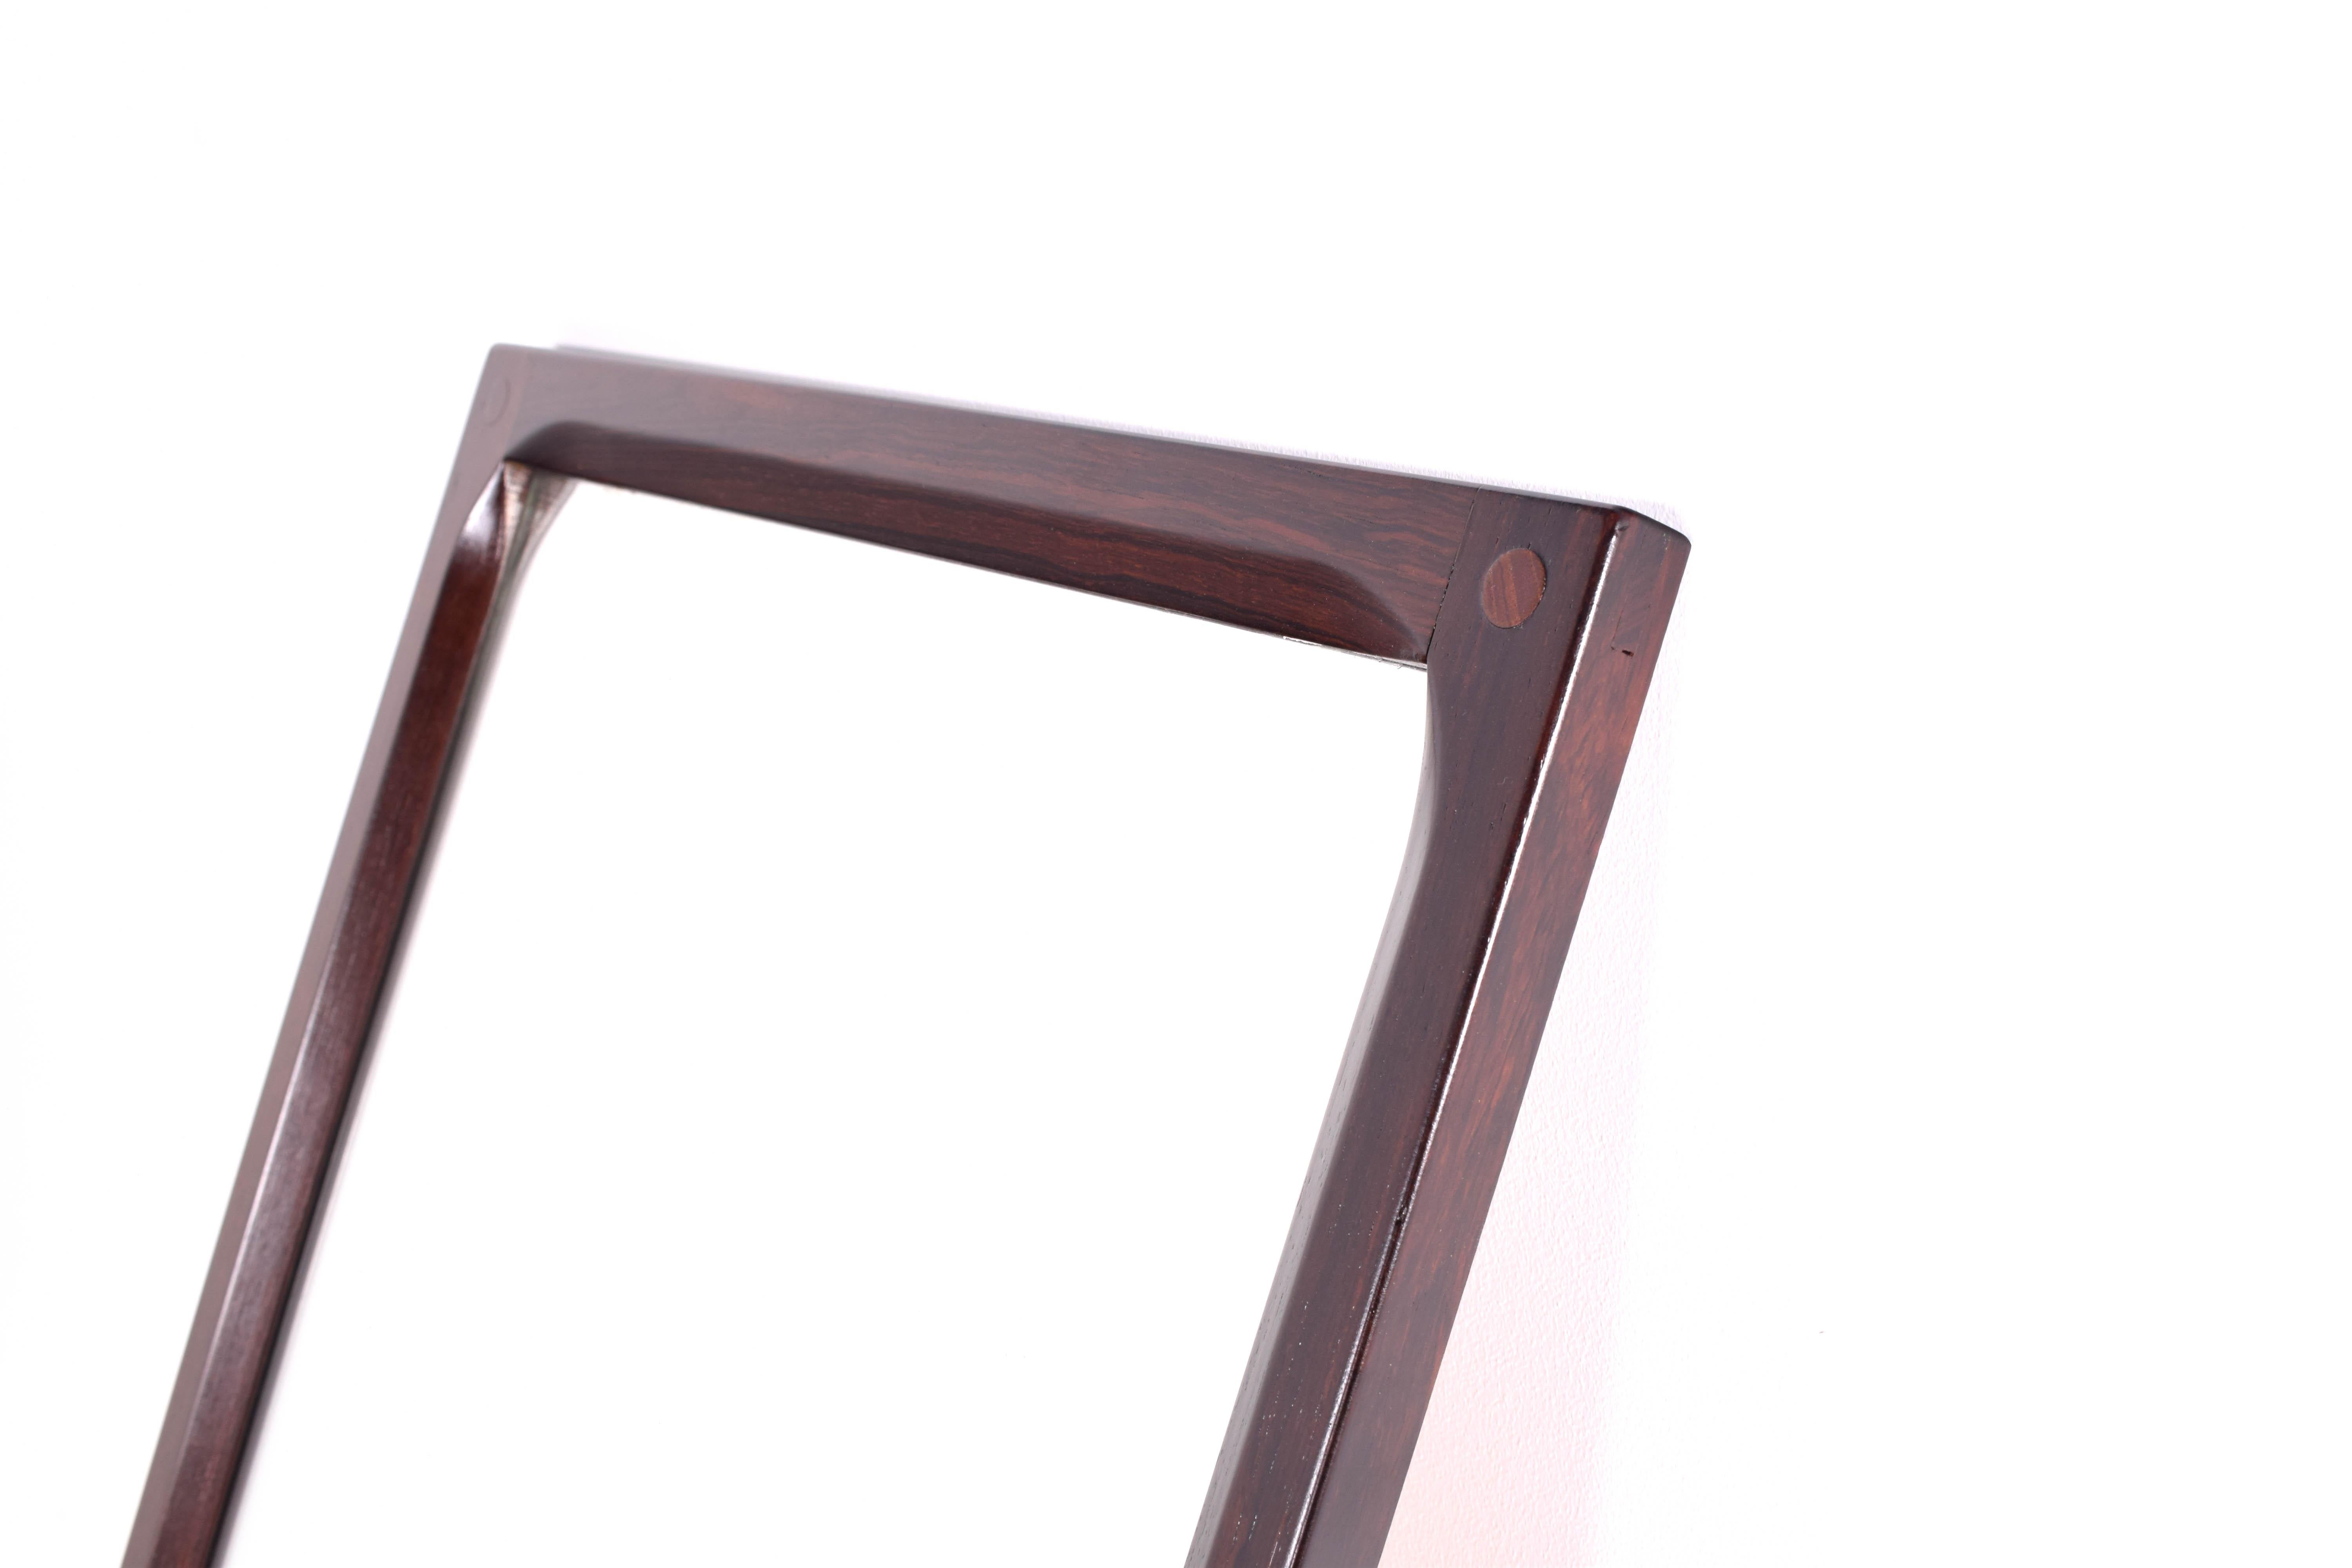 Excellent example of the Classic Scandinavian mirror in rosewood. Versatile design that will work in any room. Mirror is in excellent condition.